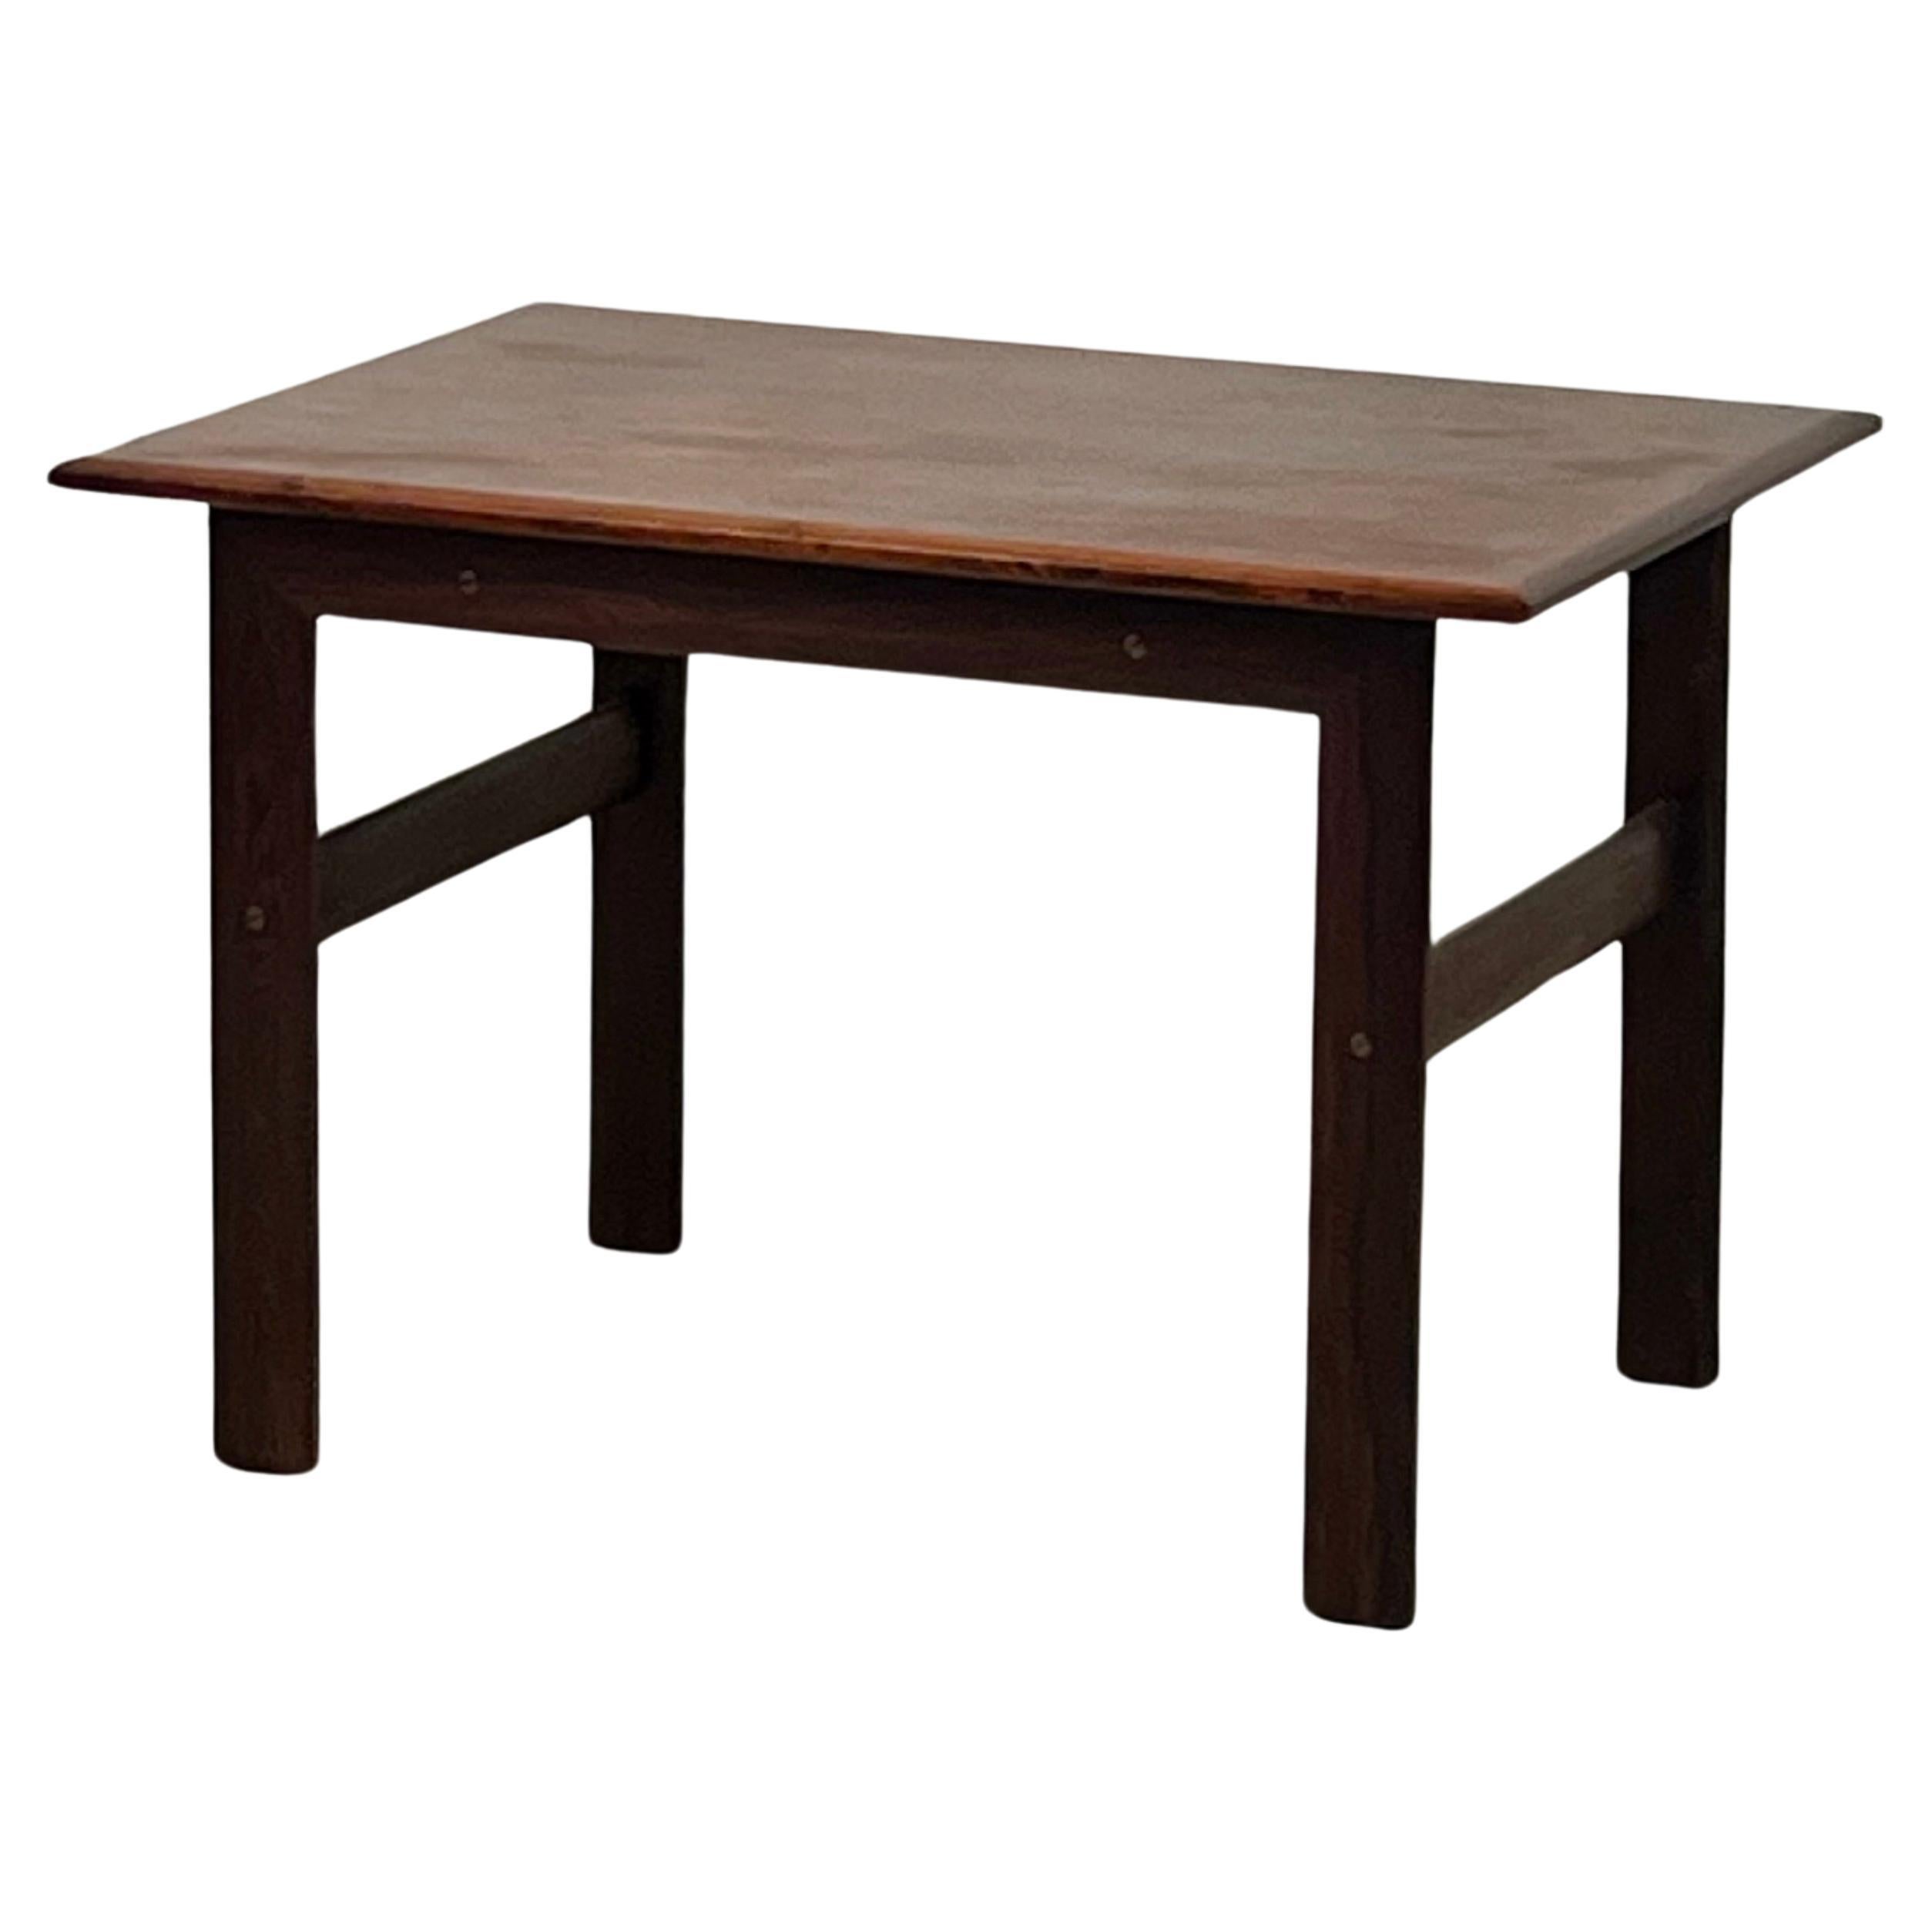 Chic Danish Midcentury Rosewood Side Table For Sale